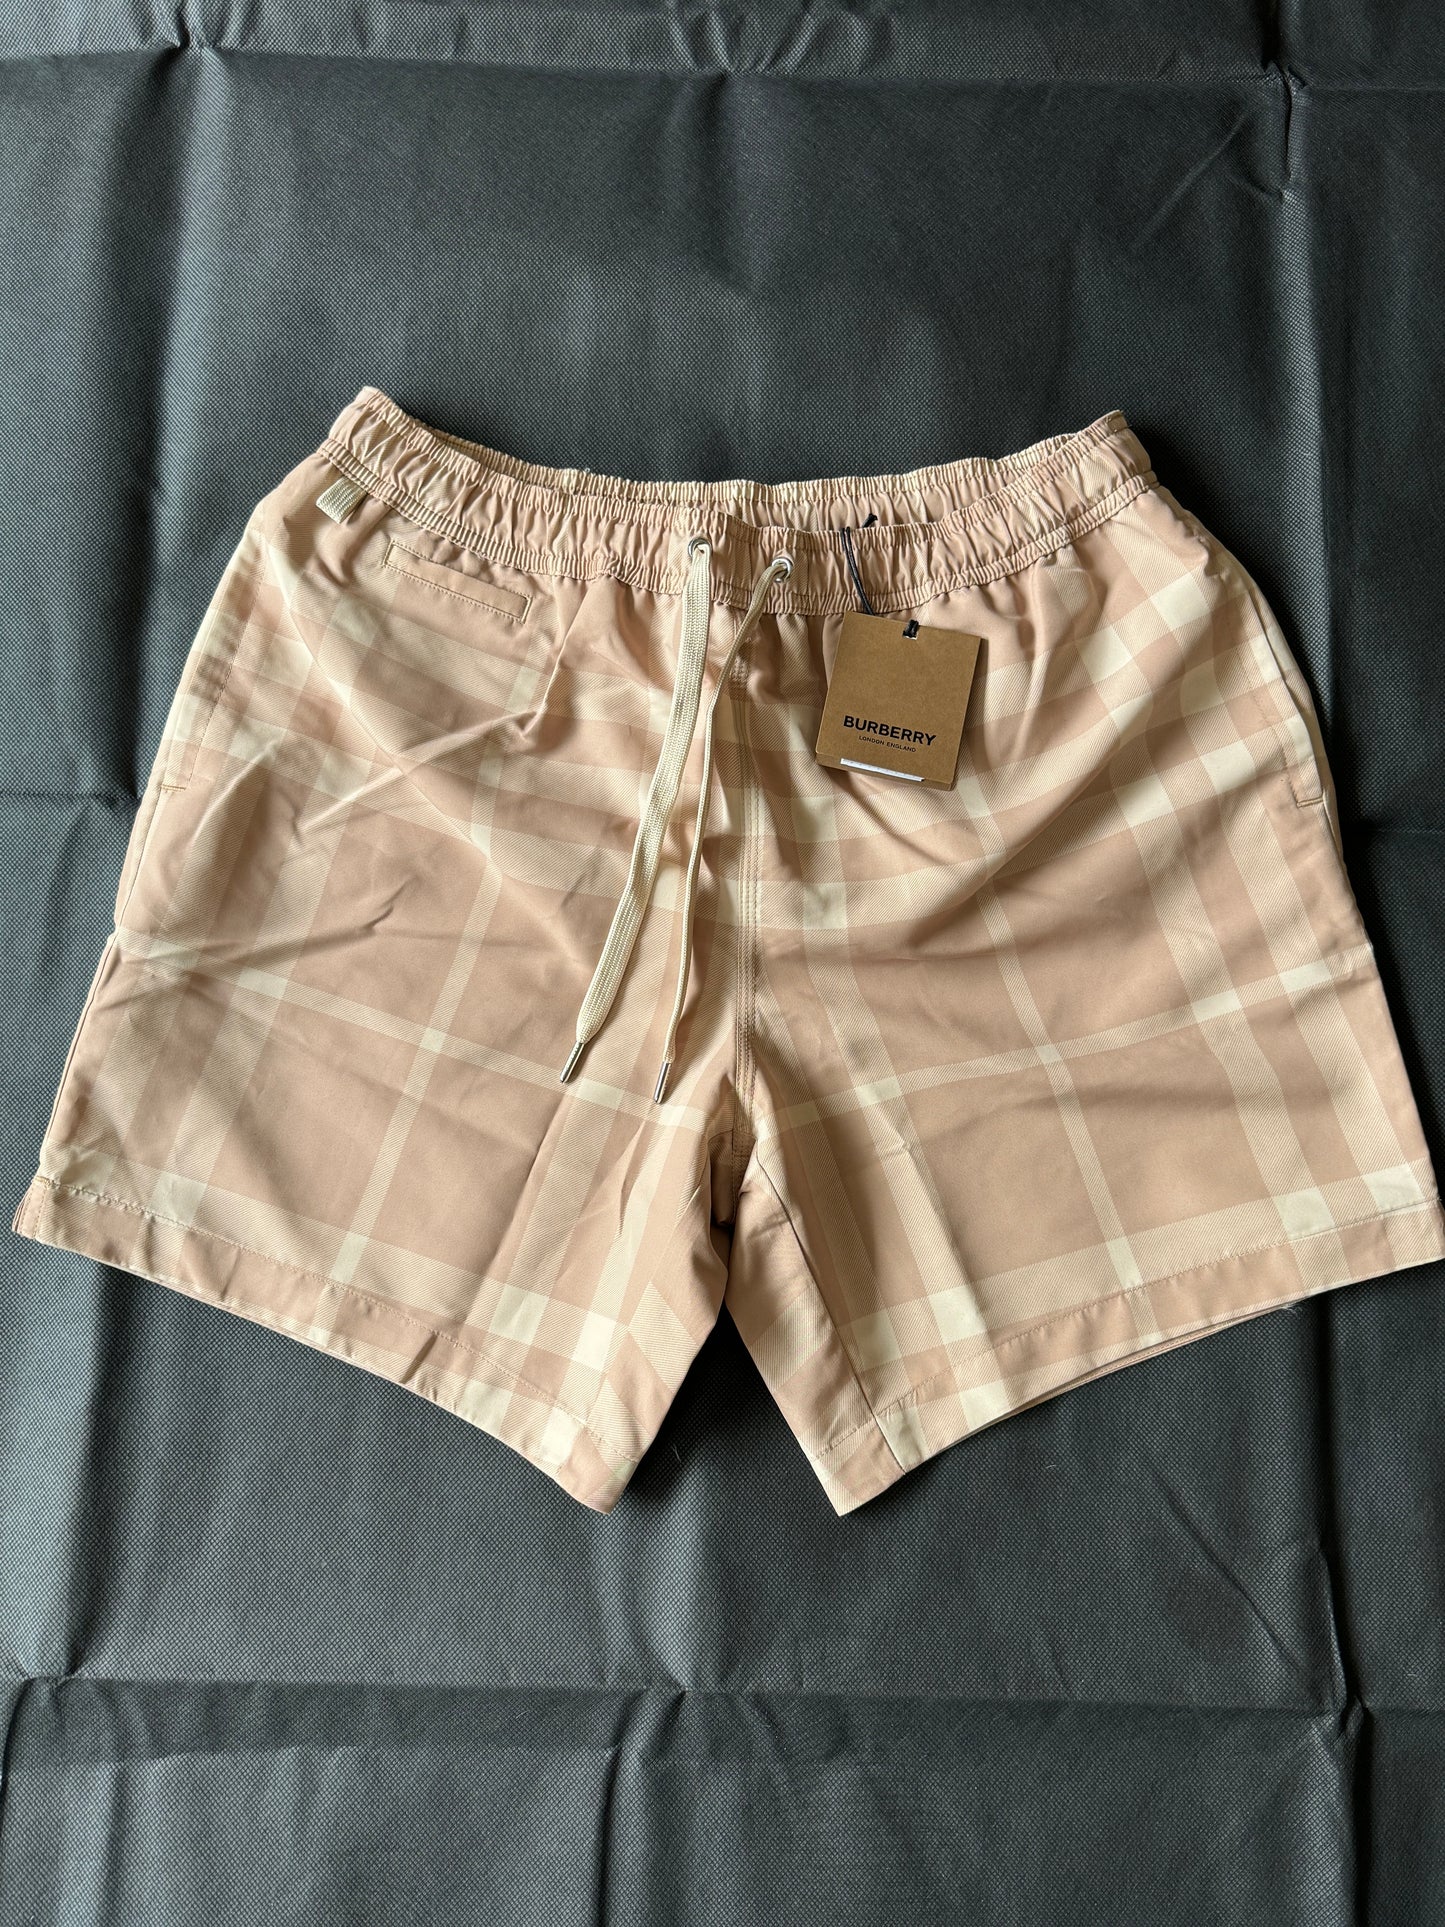 BURBERRY SOFT FAWN SWIMSHORTS